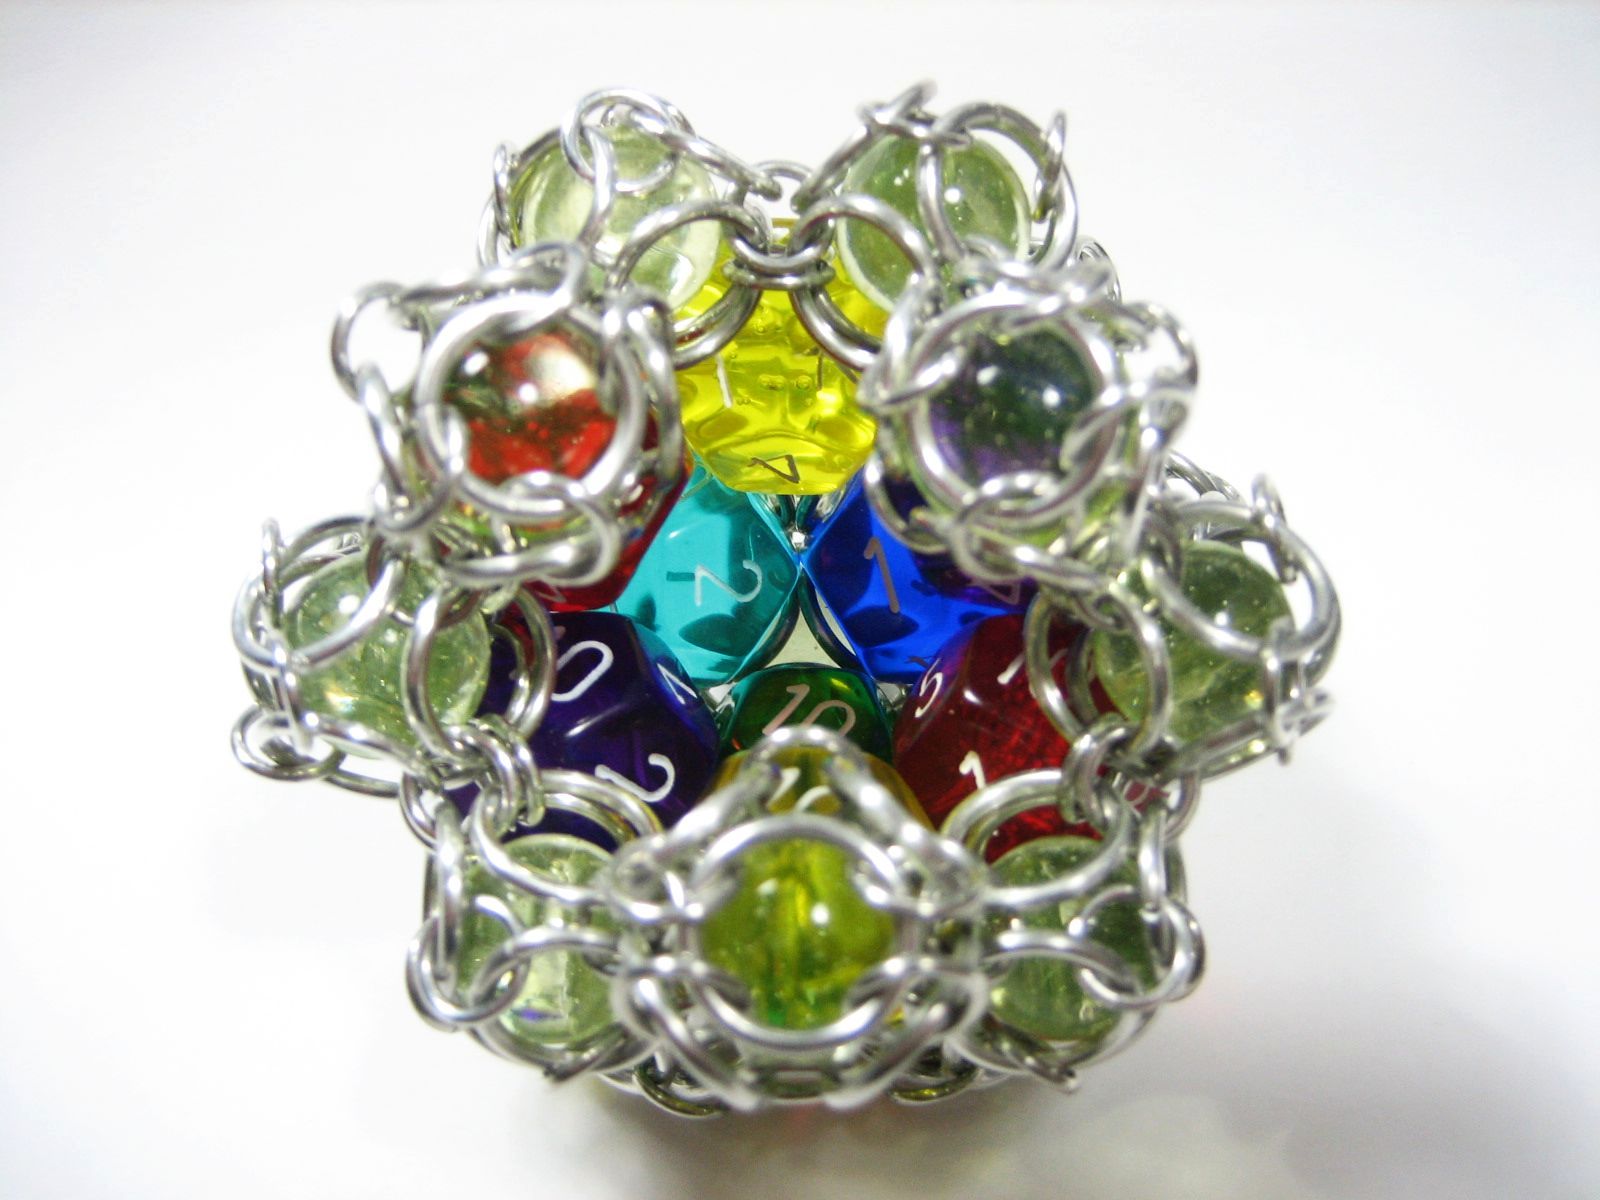 Rollable Chainmaille d12 - Inside, Hollow